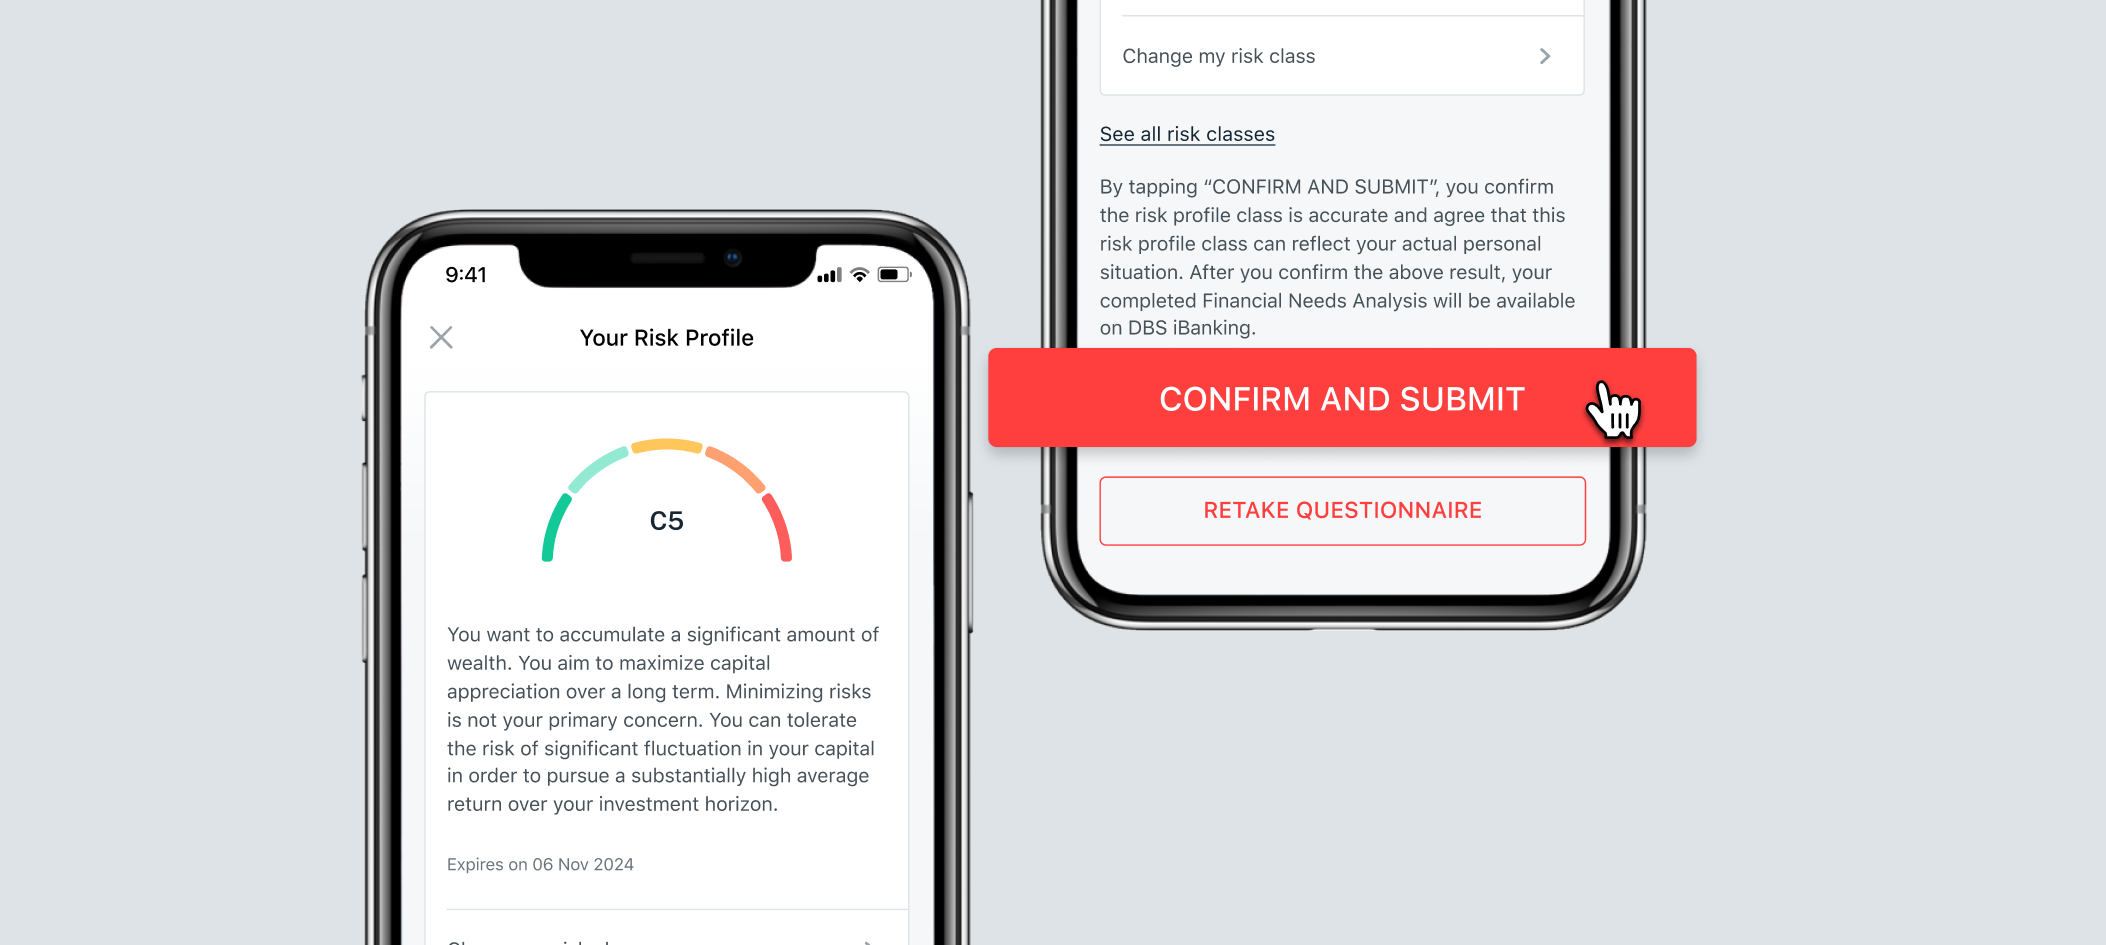 Complete all steps to get your risk profile evaluated. Tap CONFIRM AND SUBMIT to complete the questionnaire, and your Risk Profile will be reflected in real time. If you have doubt about your Risk Profile, you can adjust it to a lower risk class or retake the whole questionnaire.